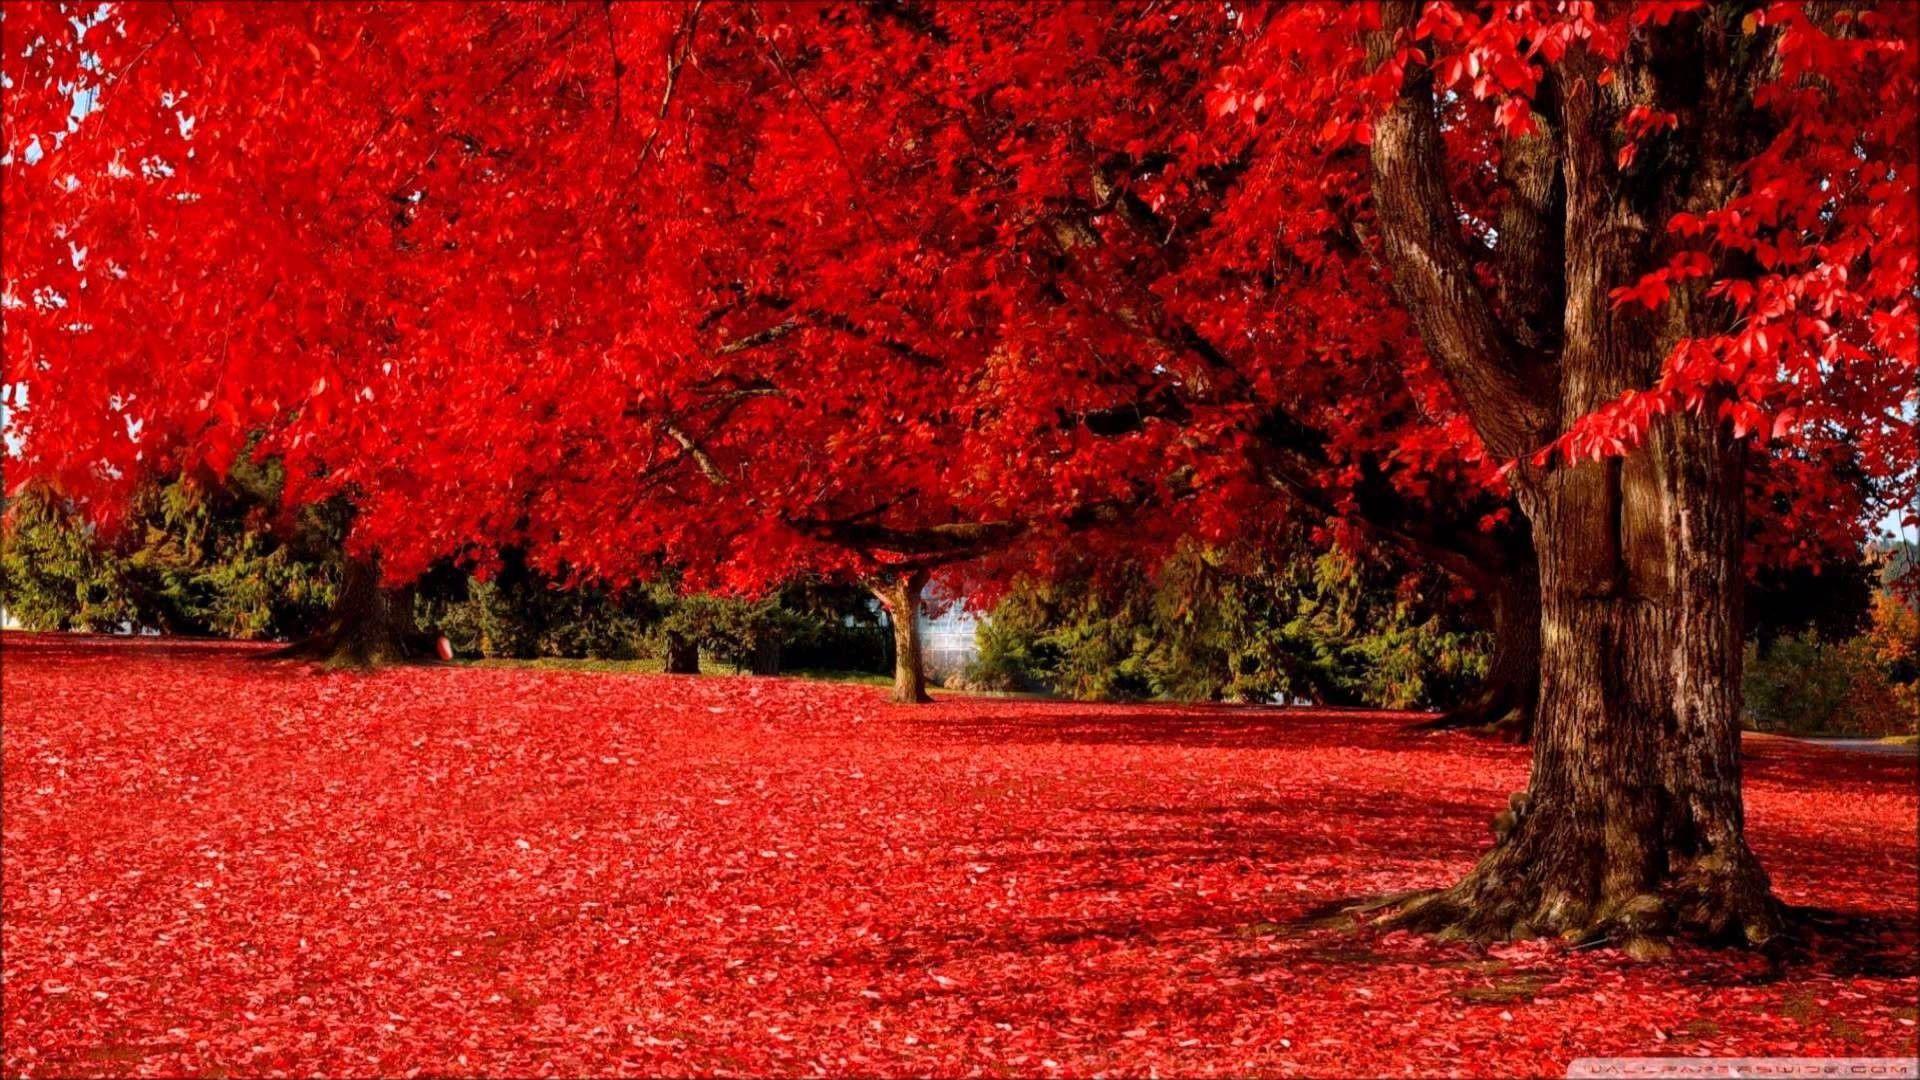 Red Tree 1920X1080 Wallpapers - Top Free Red Tree 1920X1080 Backgrounds ...